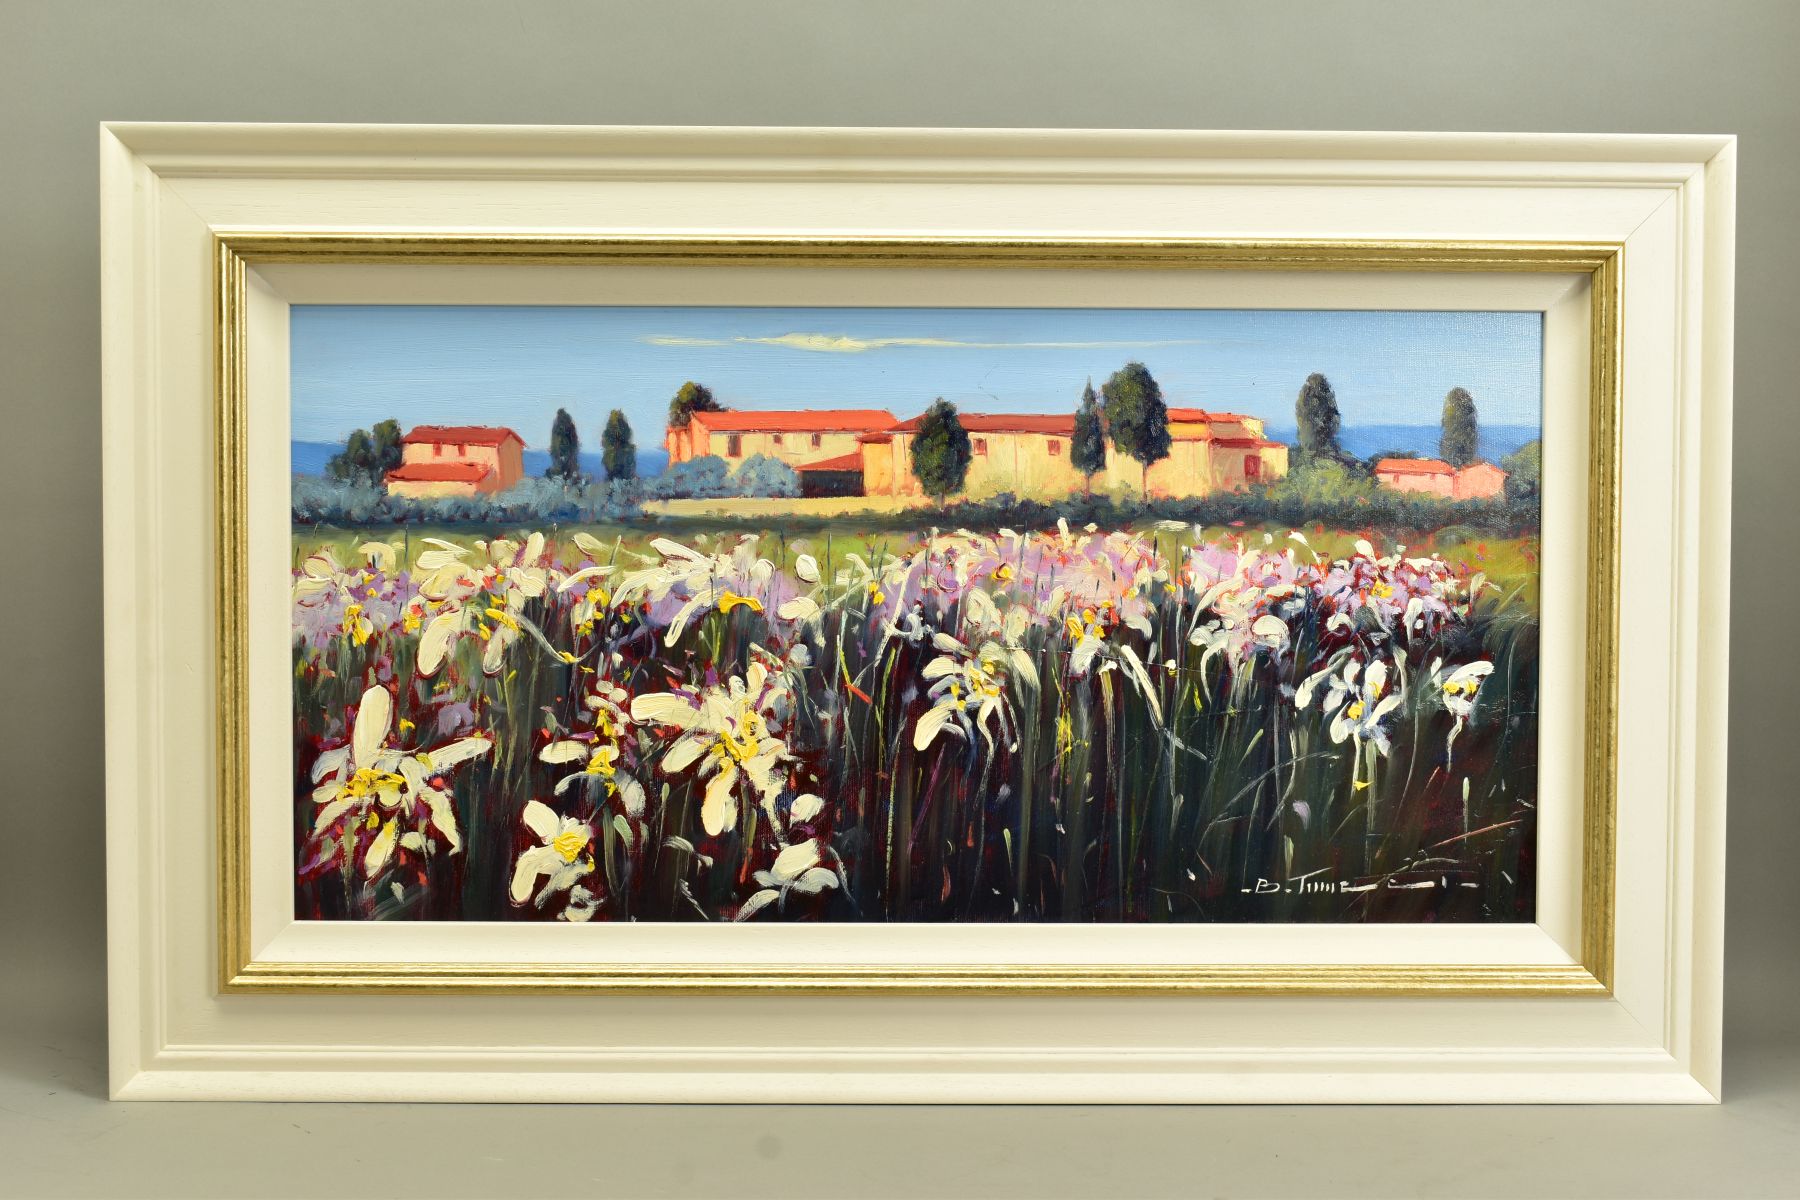 BRUNO TINUCCI (ITALY 19470) 'CAMPO BIANCO', an Italian landscape of flowers with buildings beyond,